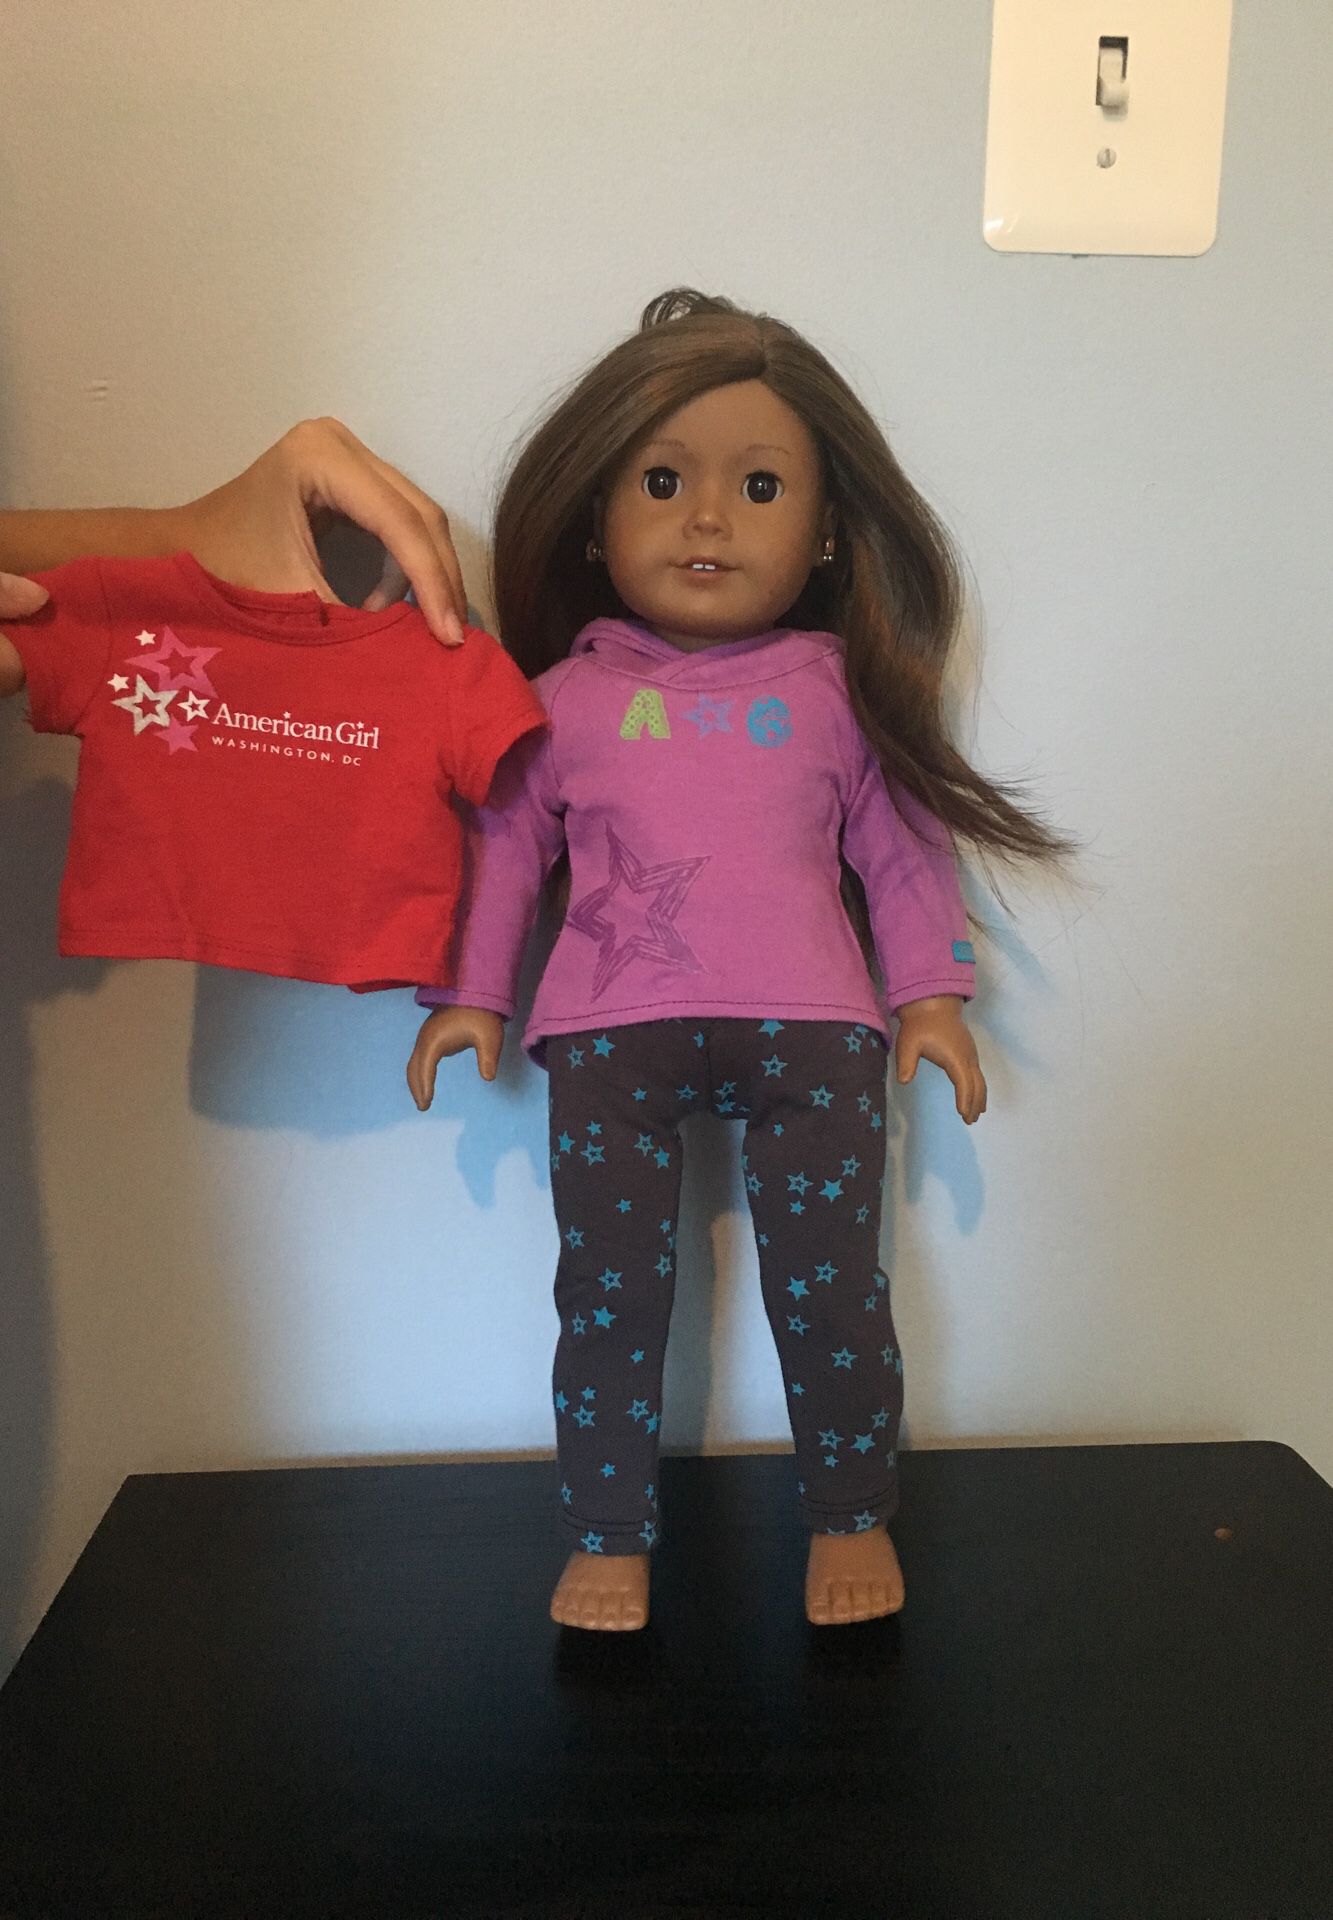 American Girl Doll; Truely Me/Just Like You/Look Alike Doll #23 + D.C. Doll shirt